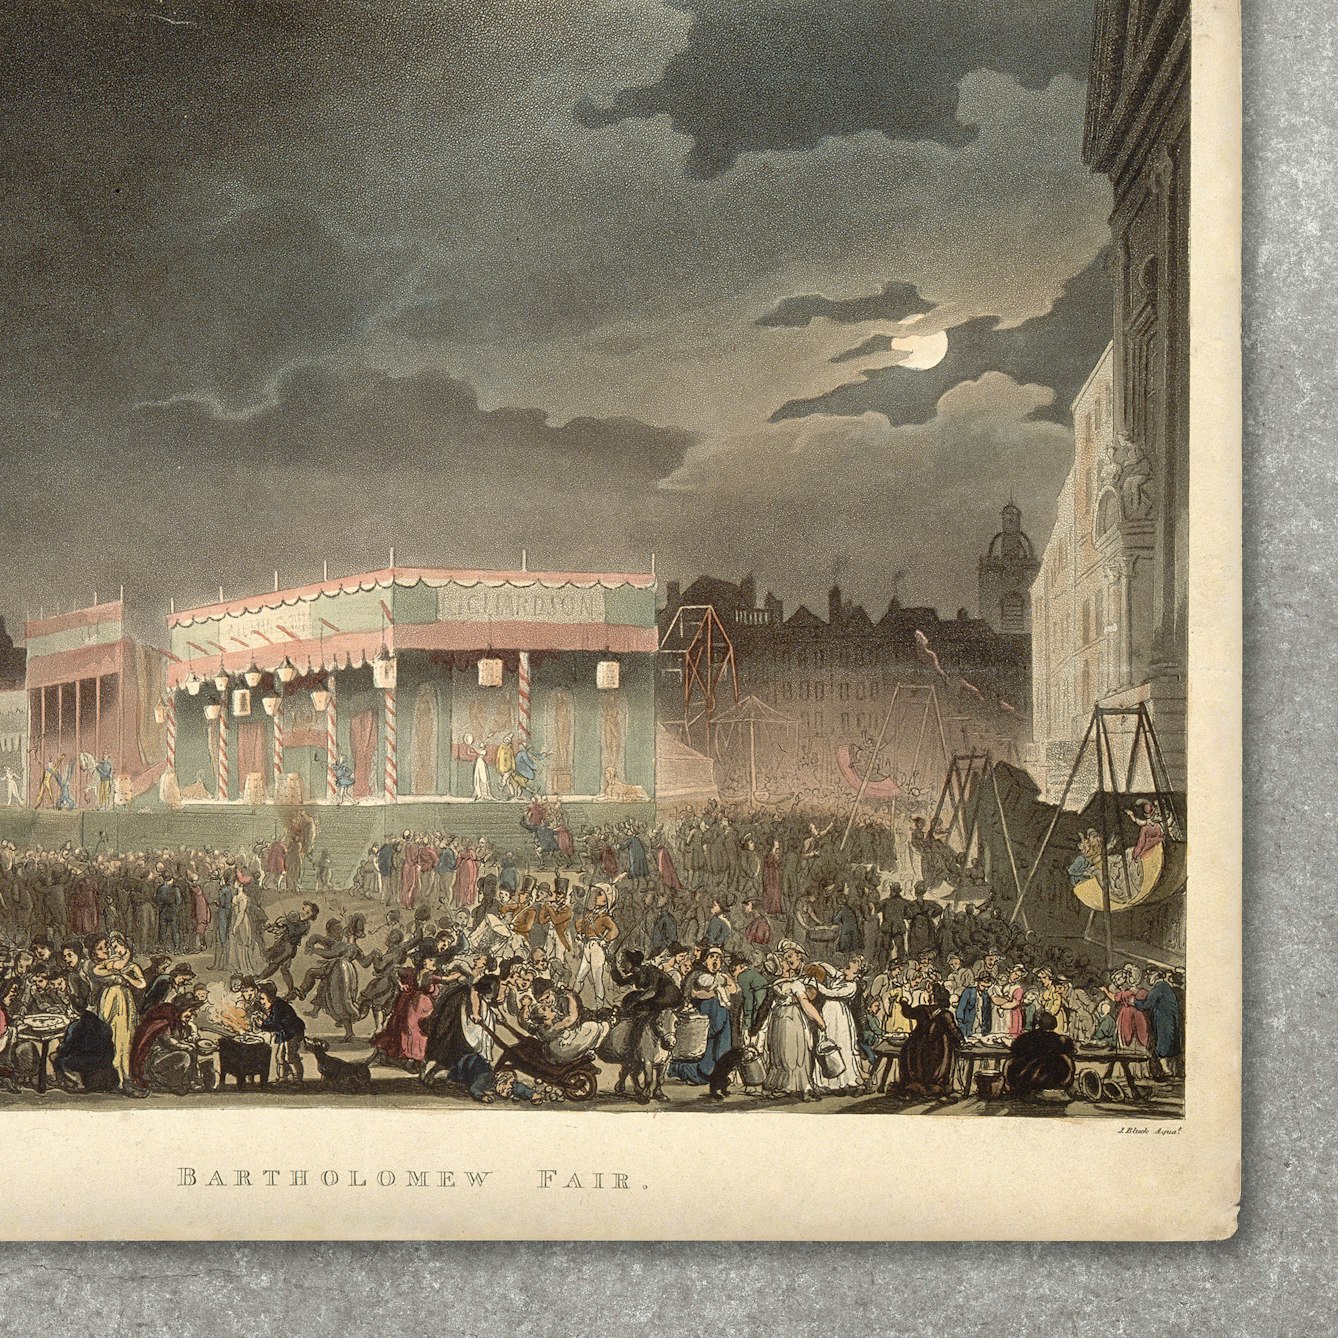 Photograph of a colour illustration against a concrete background. The illustration shows a large crowd of people gathered in an urban setting at night, with fair ground rides. The sky is dark and a full moon emerges from behind some clouds.